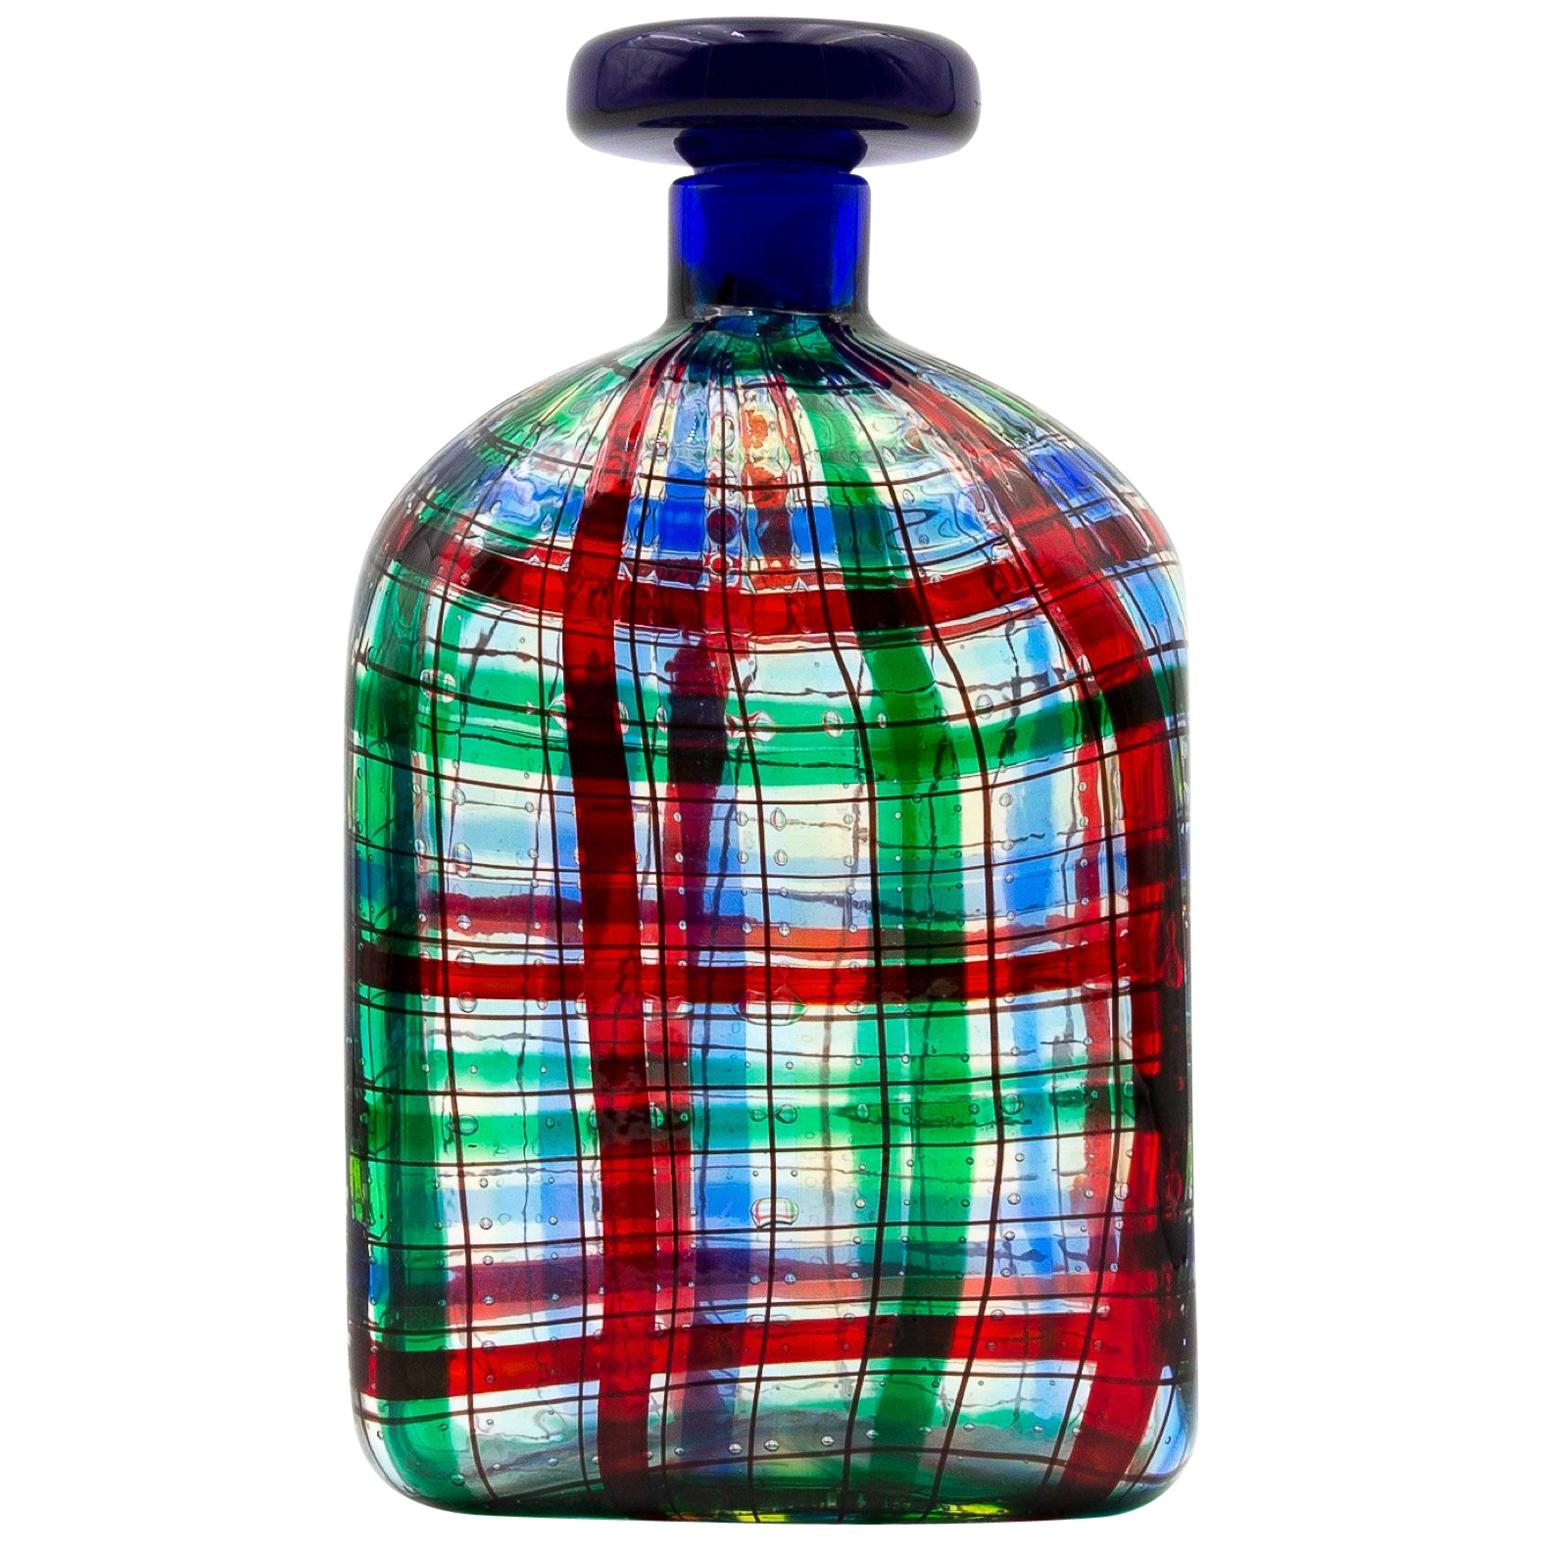 Barovier for Christian Dior Paris "Tartan" Murano Glass Bottle with Stopper